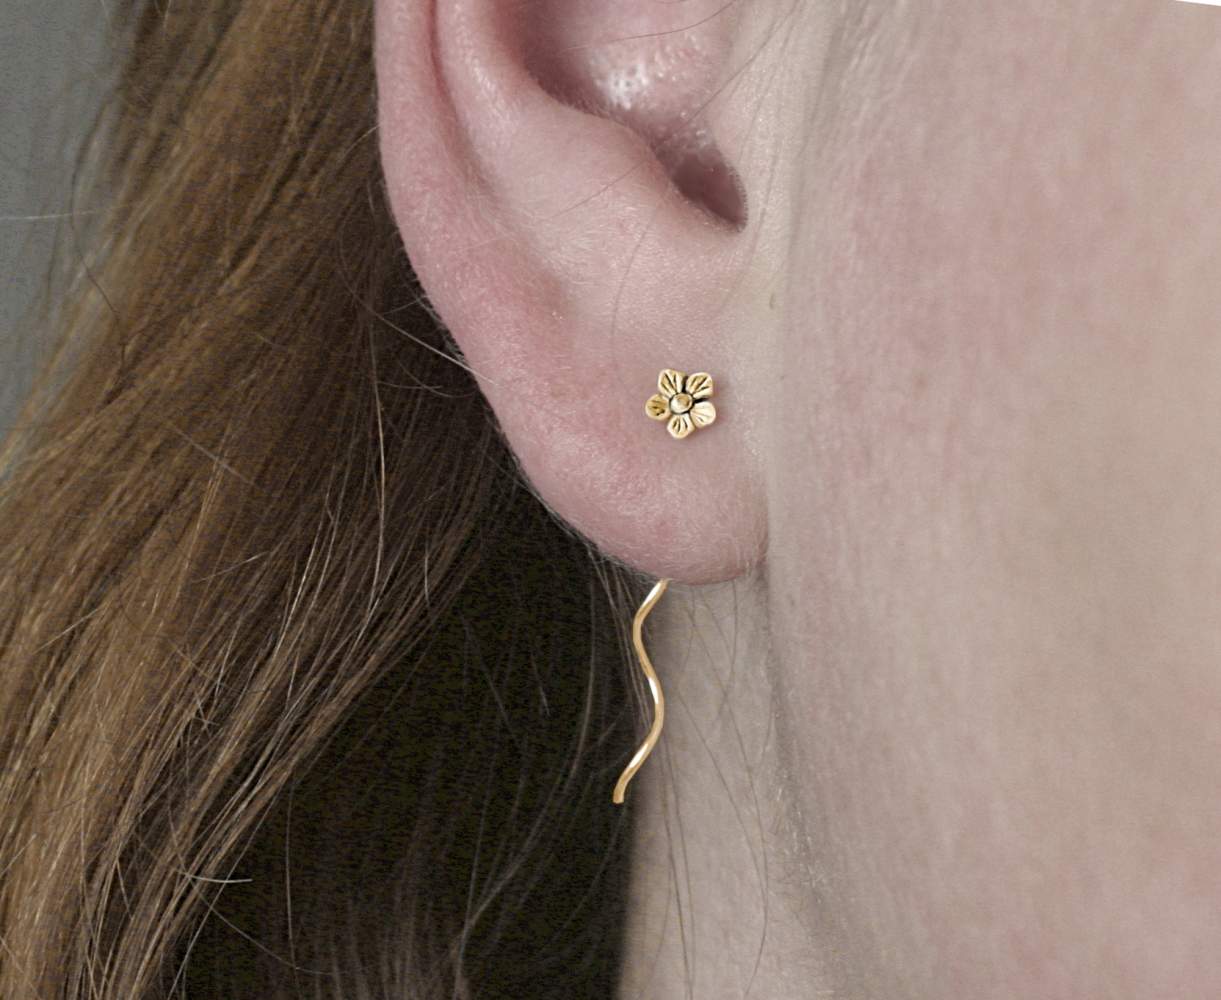 Tiny gold flower earrings. Dainty sterling gold plated threader stud earrings. Vermeil quality